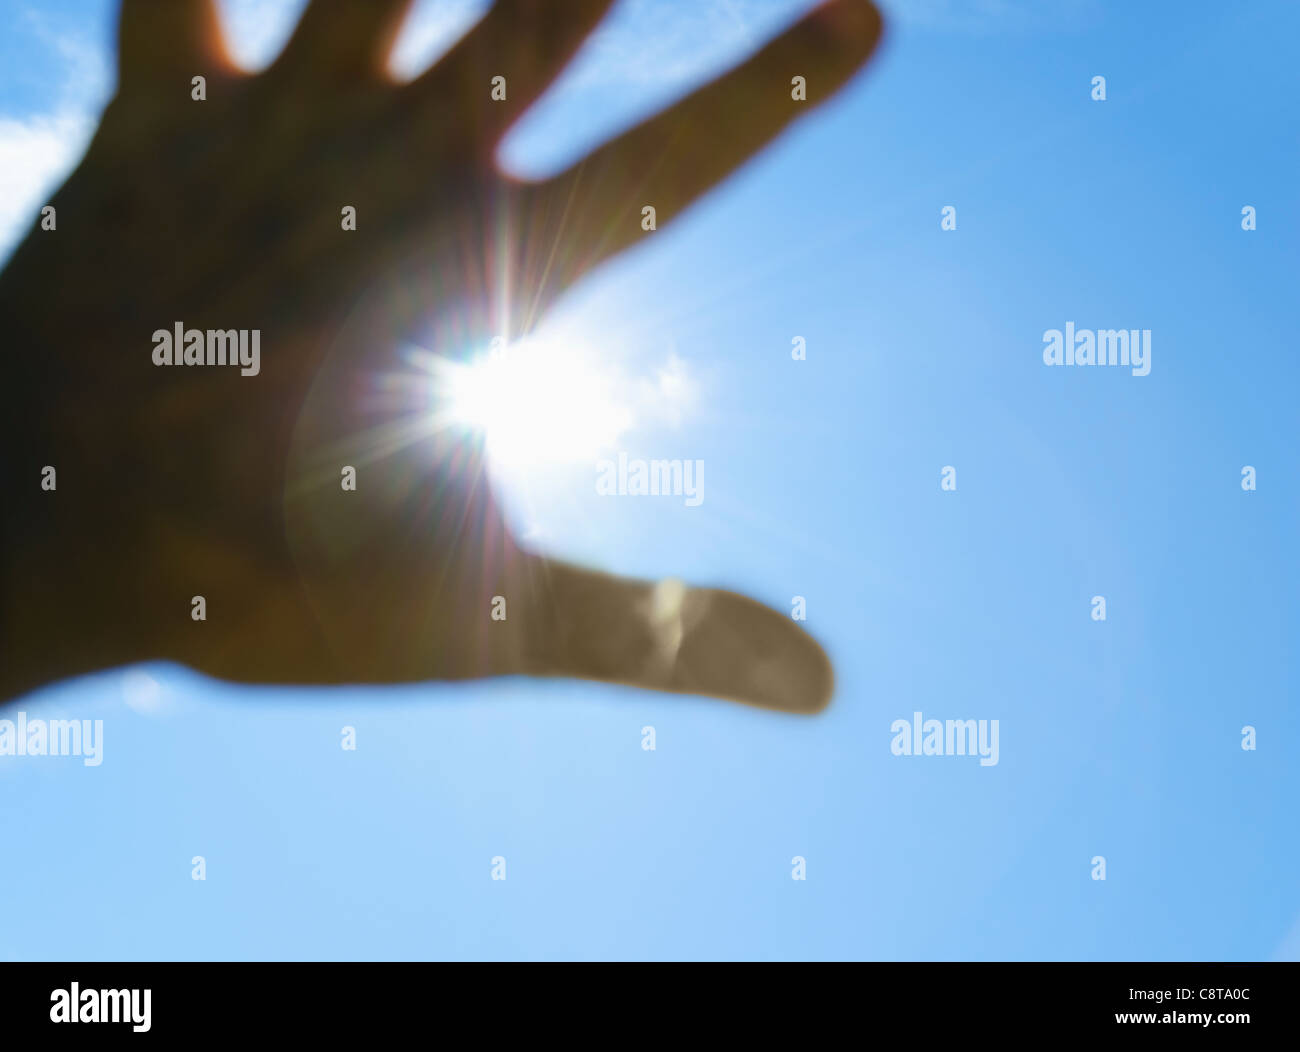 USA, New York City, Hand in front of sun Stock Photo